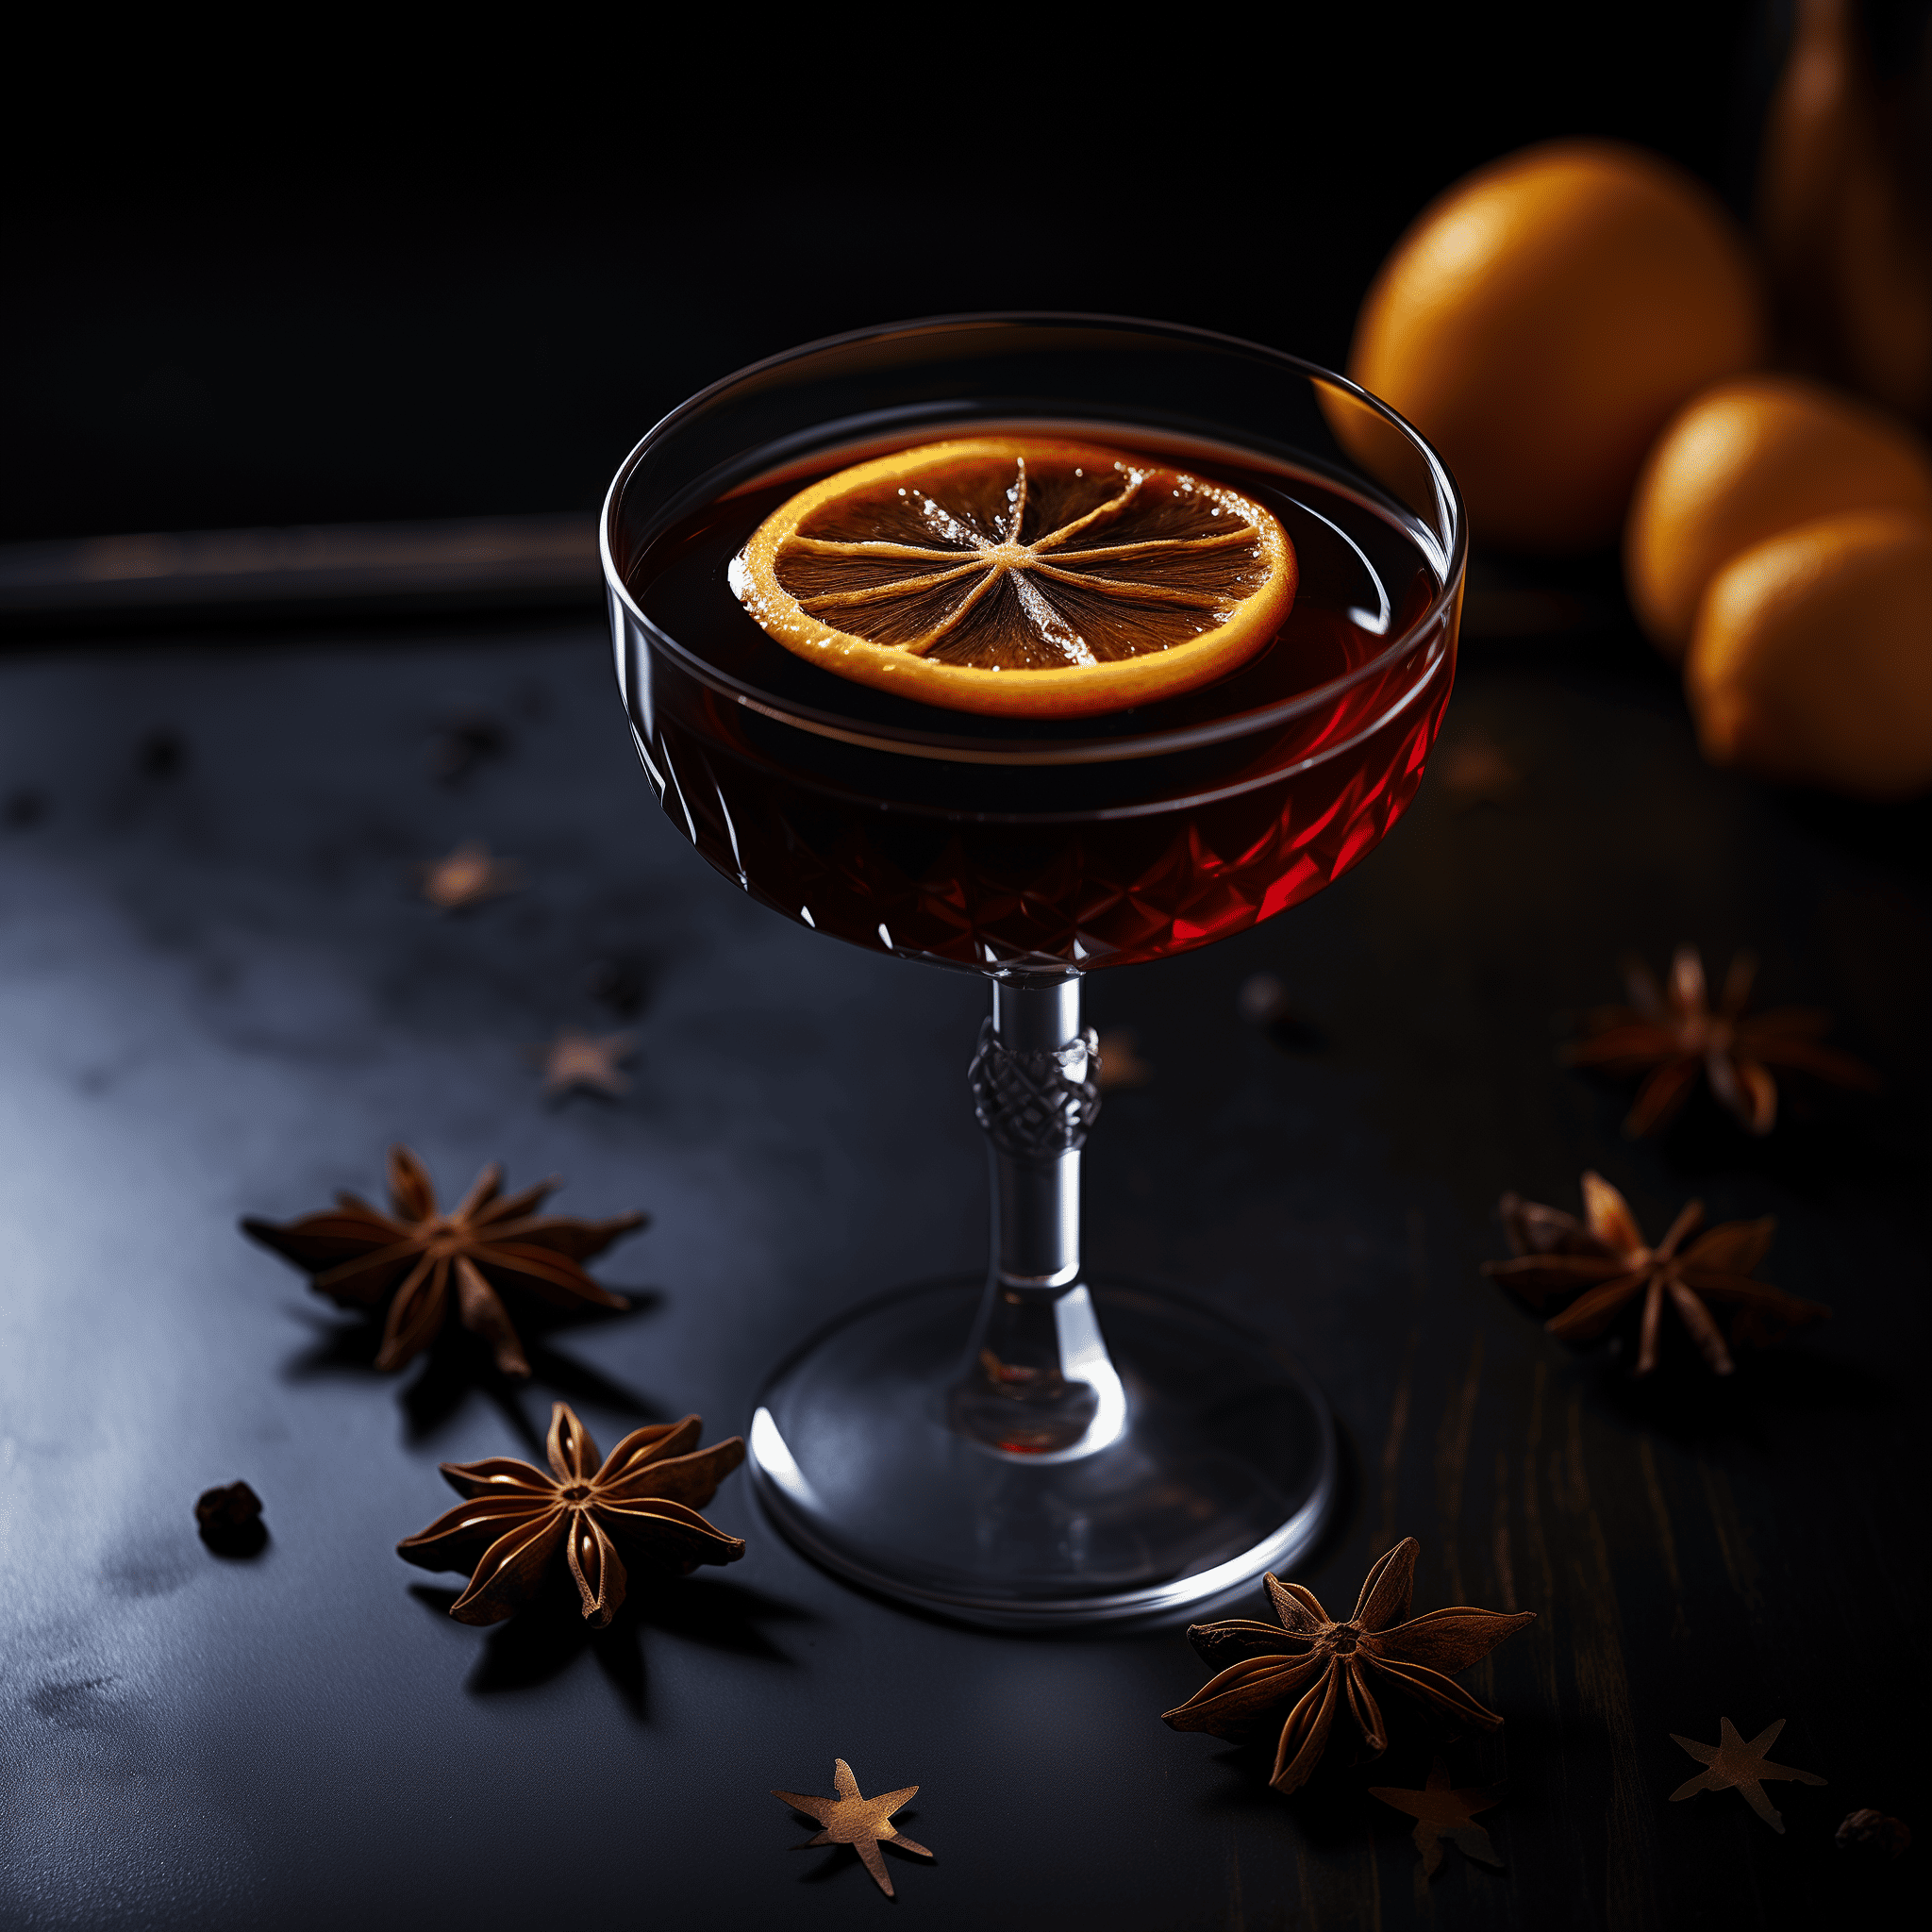 The Black Mamba cocktail offers a complex flavor profile. It's a harmonious blend of herbal, fruity, and slightly bitter notes, with a warming sensation from the mulled wine and a crisp finish thanks to the lemon.